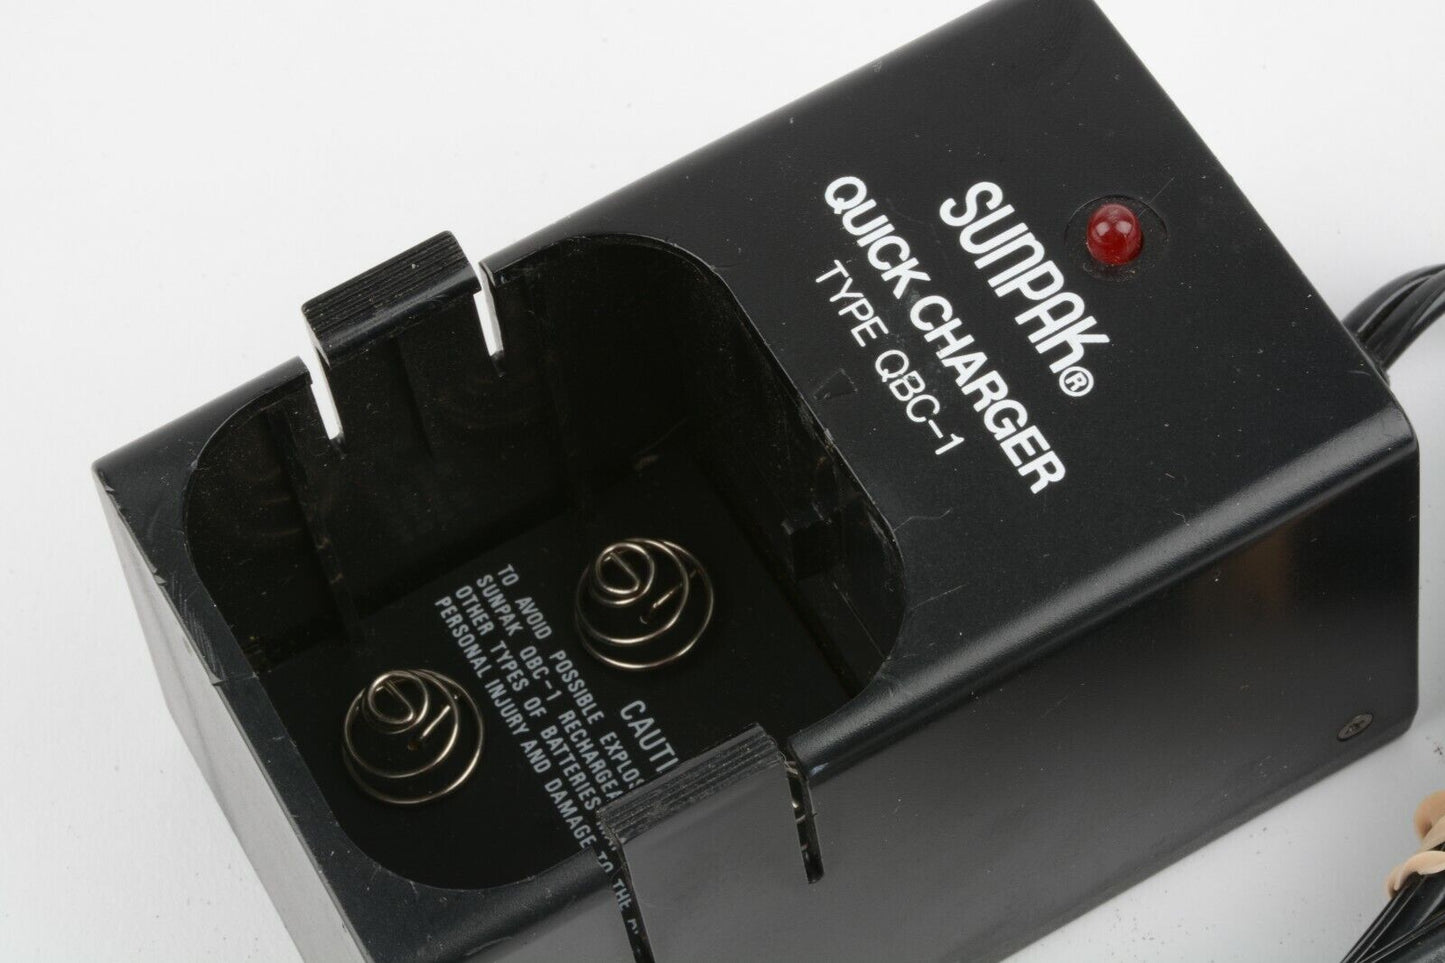 EXC++ SUNPAK QBC-1 QUICK NICAD MODULE BATTERY CHARGER, TESTED